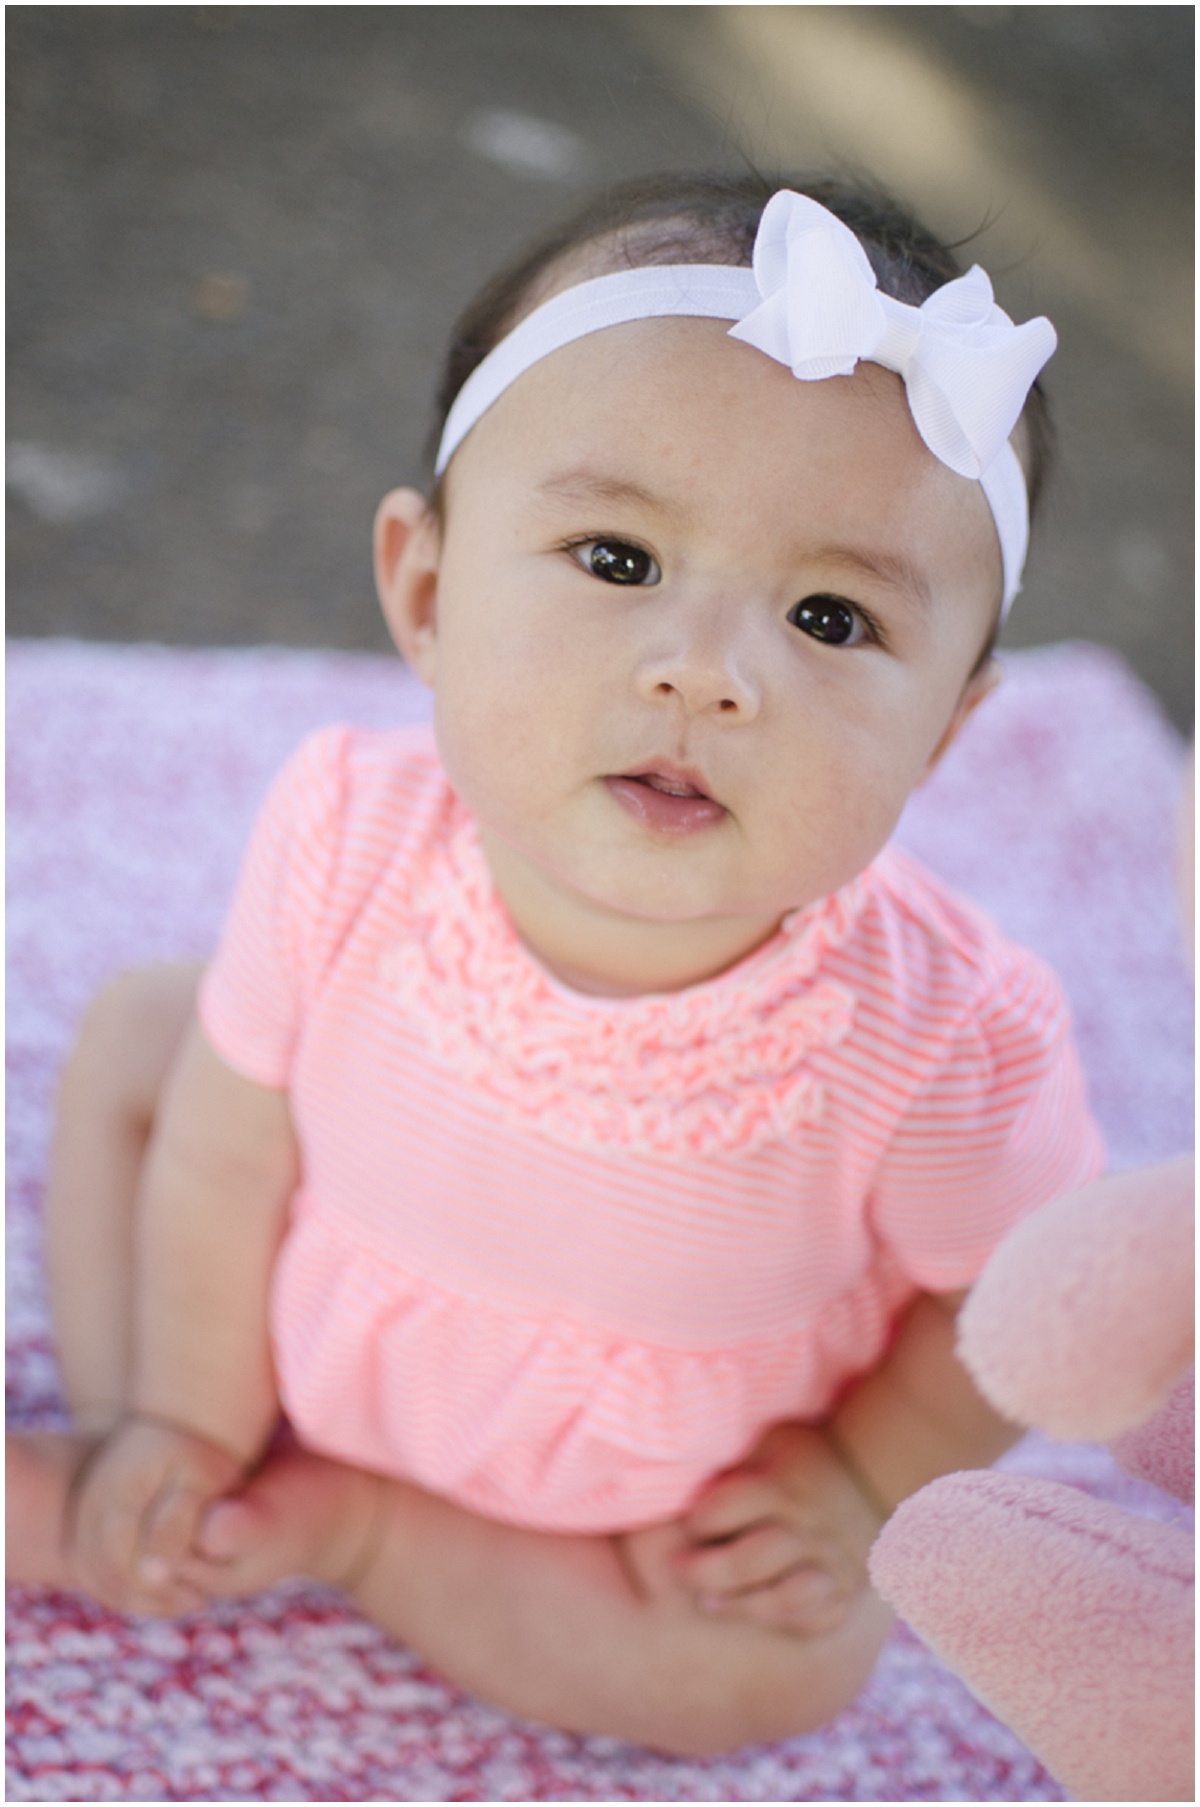 Alexis | 6 Months Old